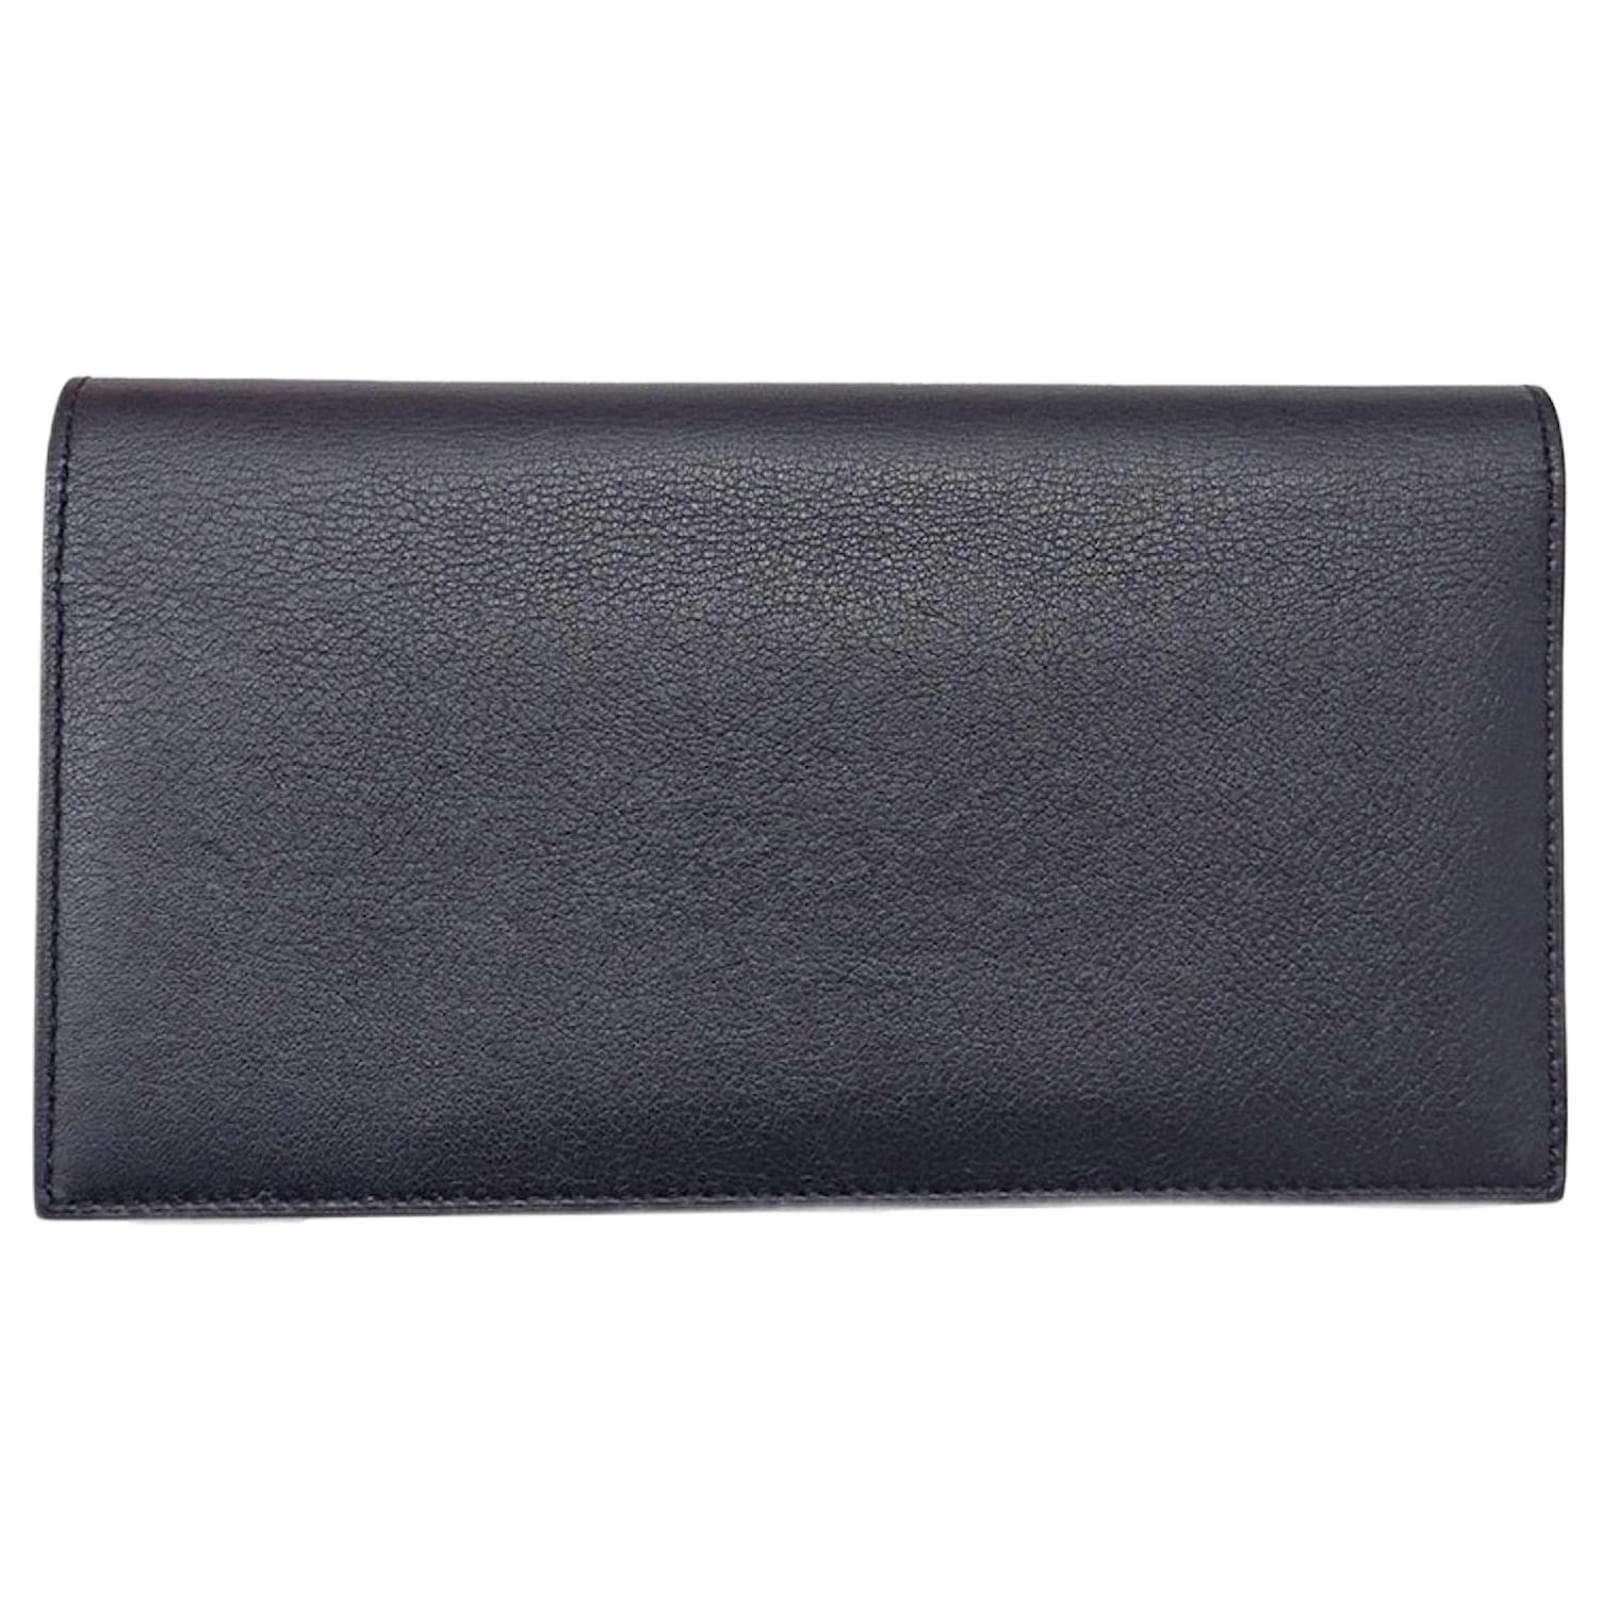 Hermes Citizen Twill Leather Card Holder 